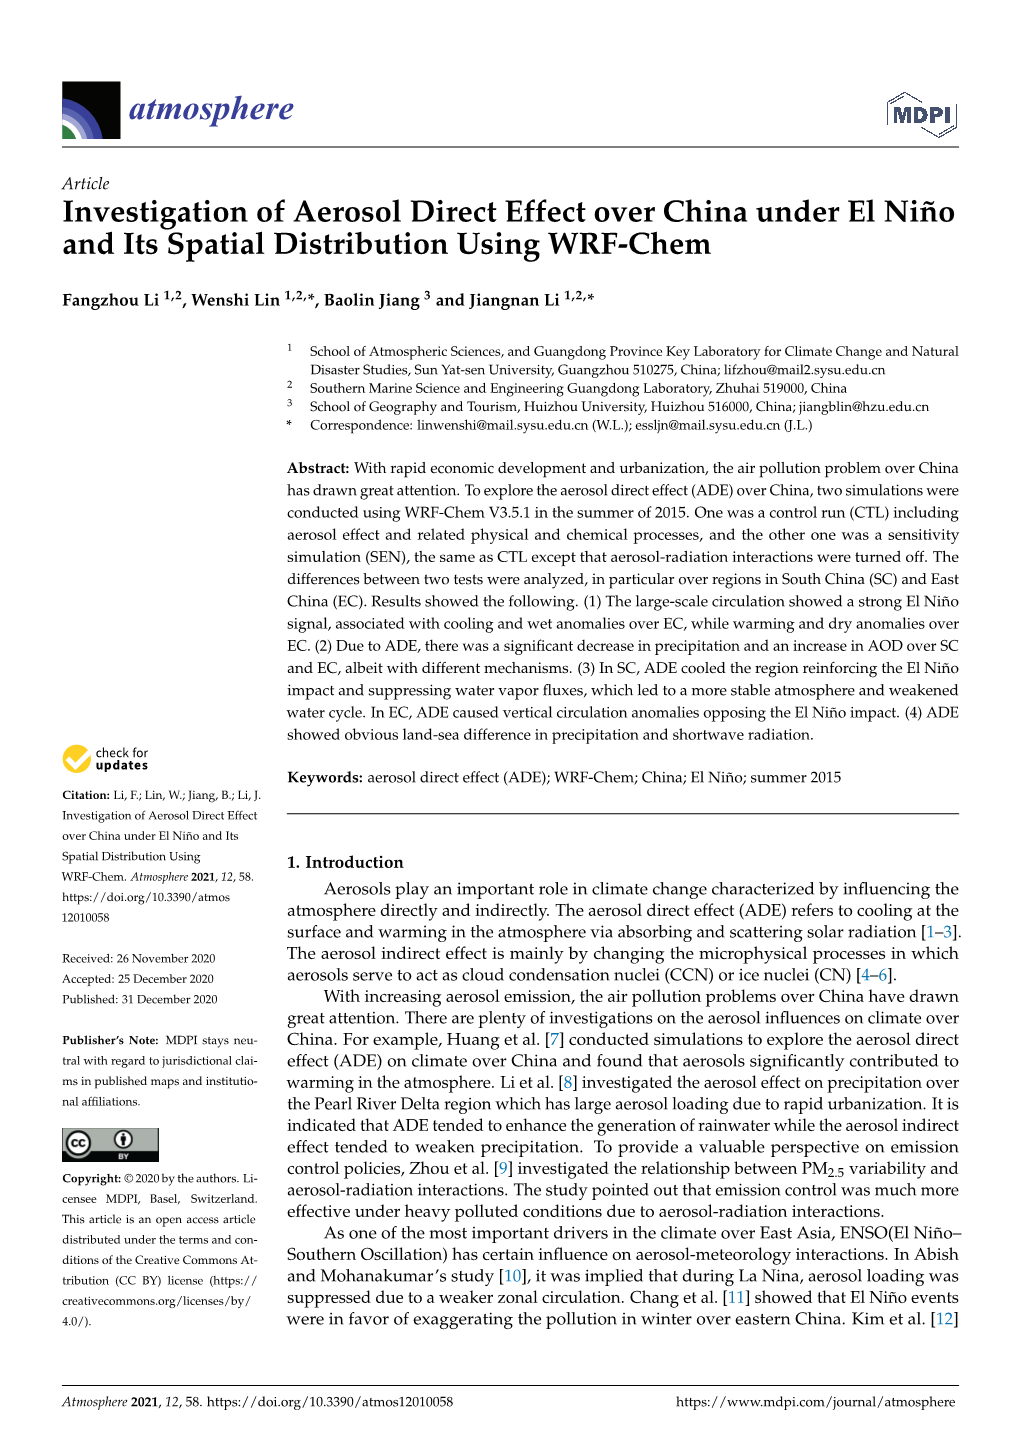 Investigation of Aerosol Direct Effect Over China Under El Niño and Its Spatial Distribution Using WRF-Chem